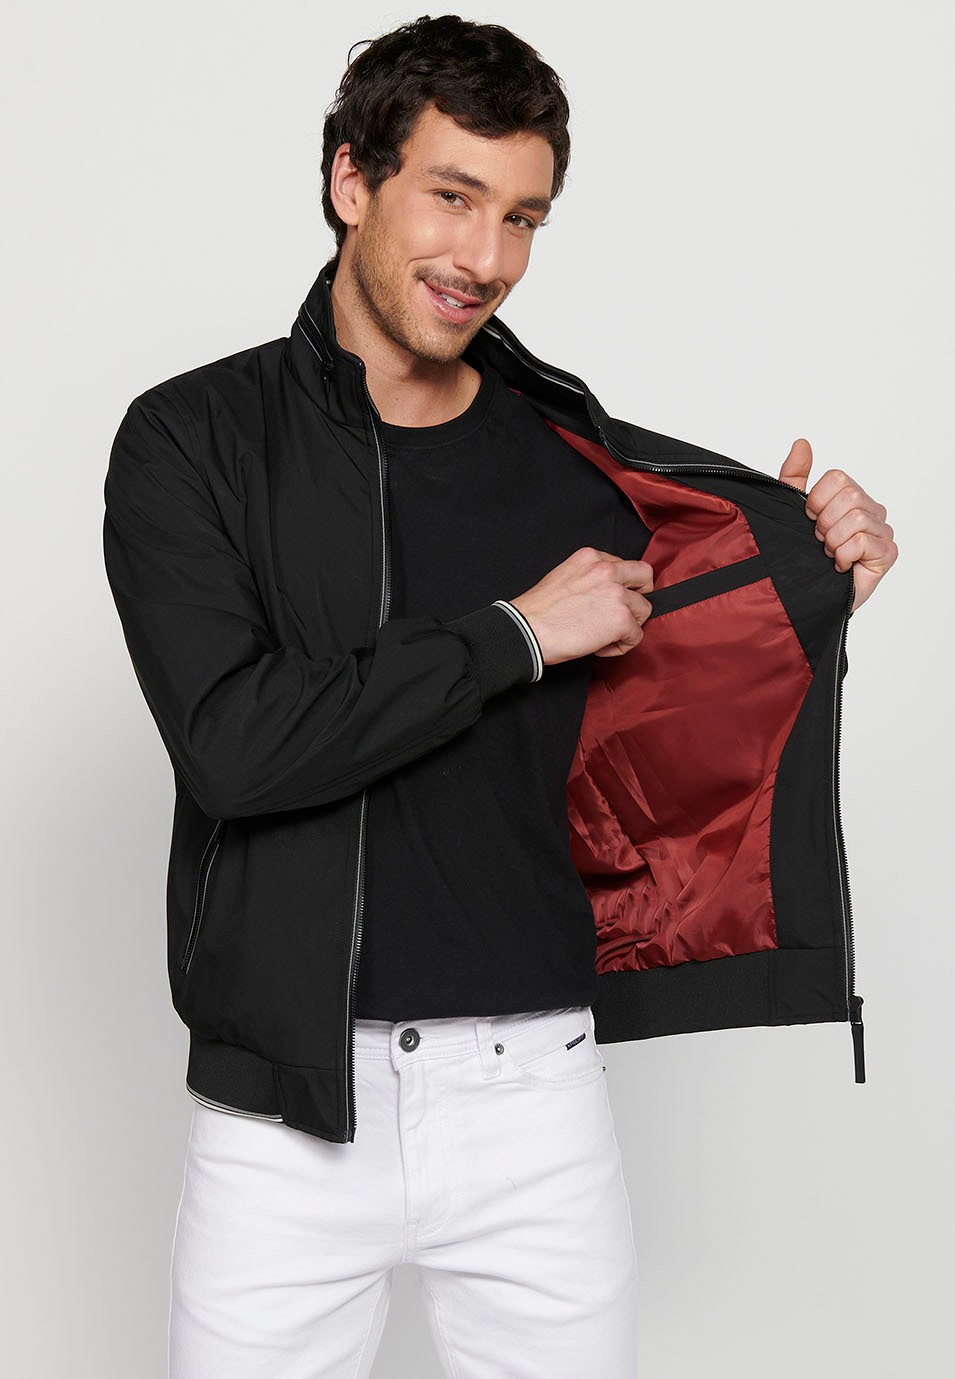 Long-sleeved high-neck windbreaker jacket with front zipper closure and ribbed finishes with pockets, one inside in Black for Men 5